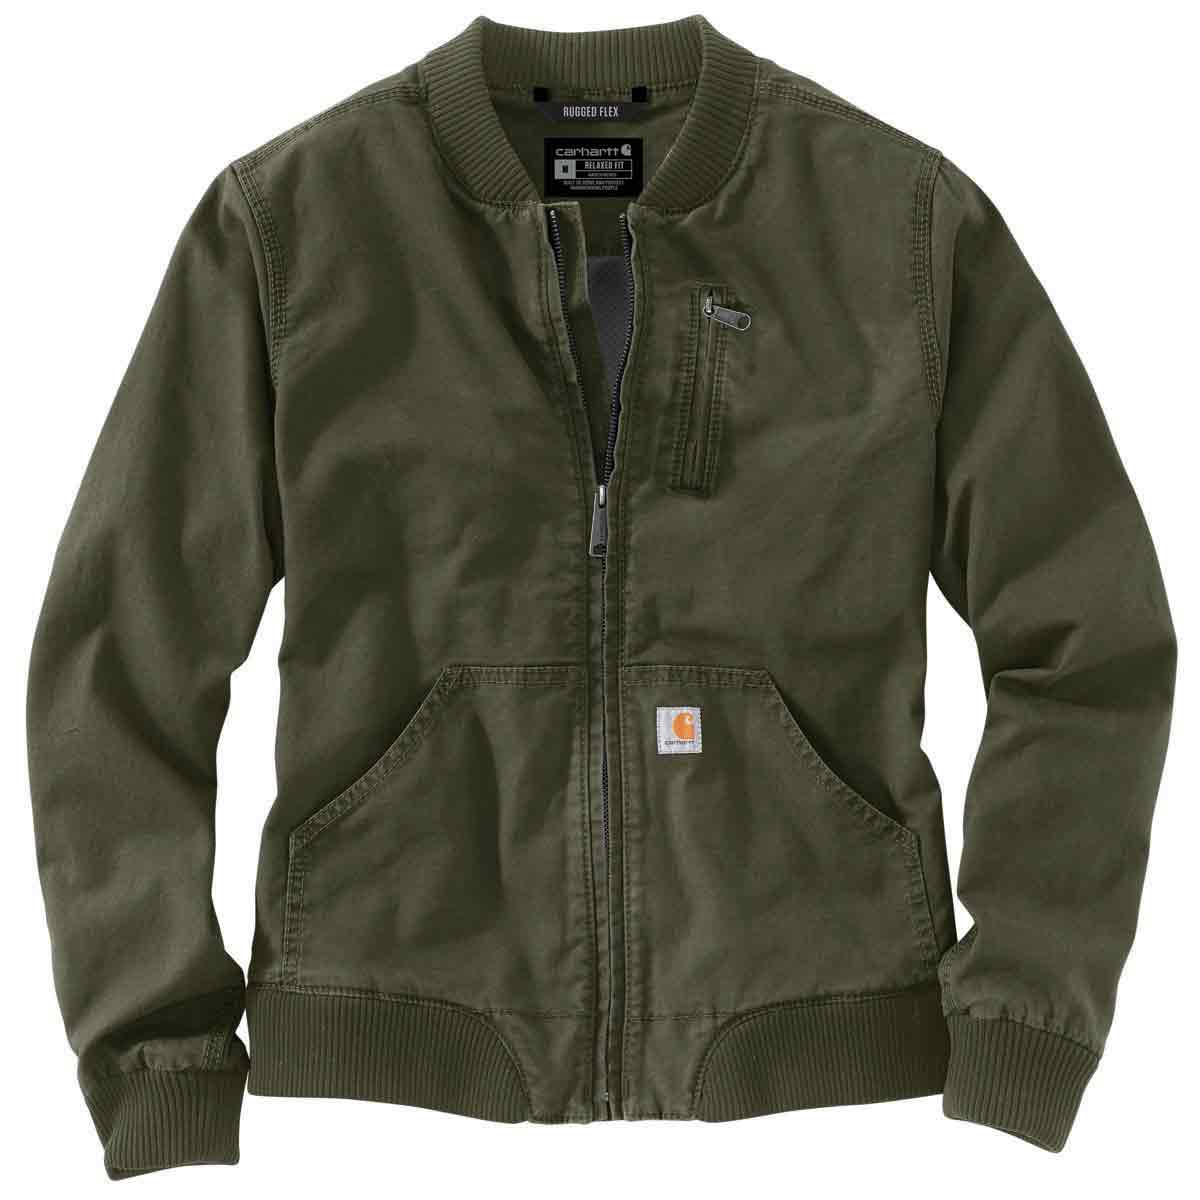 Carhartt - WOMEN'S RUGGED FLEX® RELAXED FIT CANVAS JACKET - STYLE #102